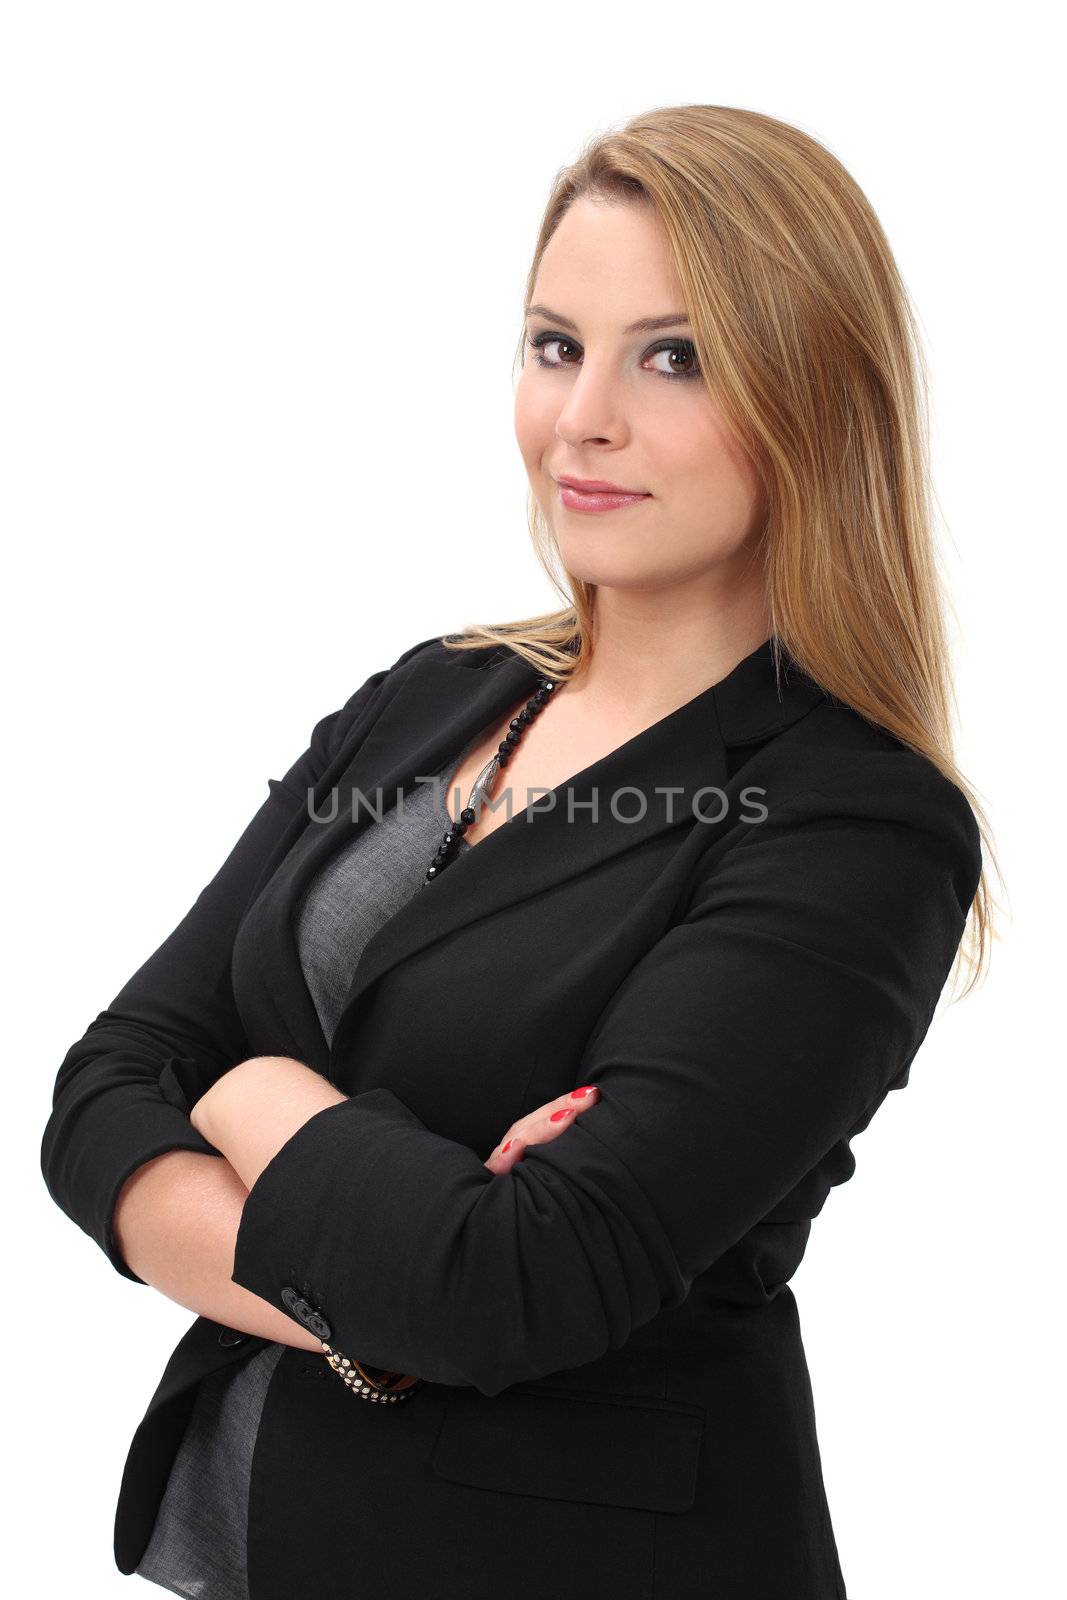 Photo of a young blond business woman standing with her arms crossed.
